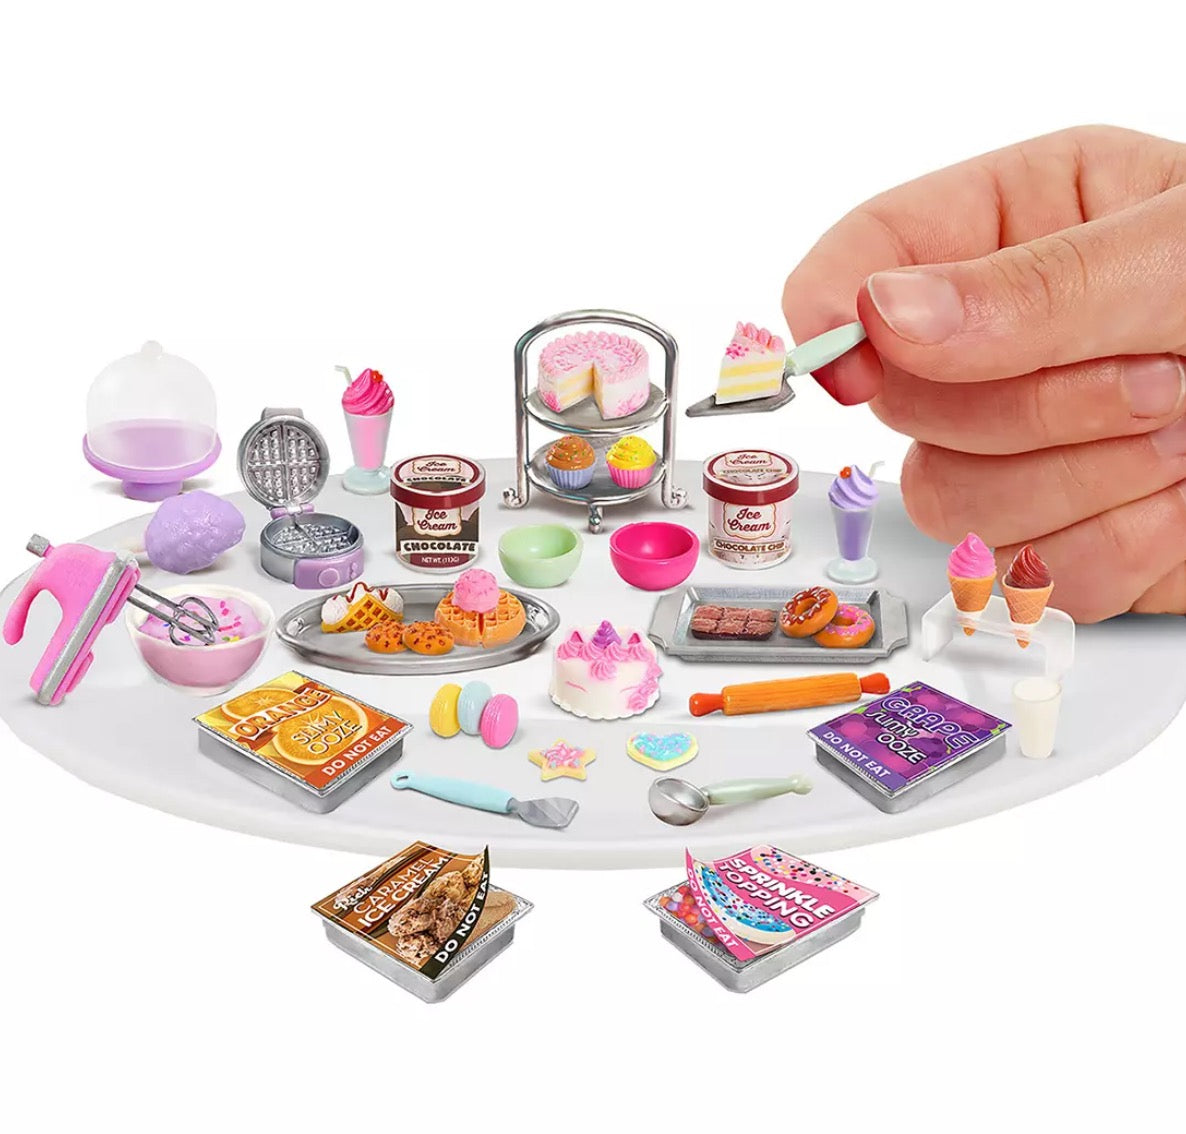 Tiny Bakery Ingredients, Create the recipe with slime